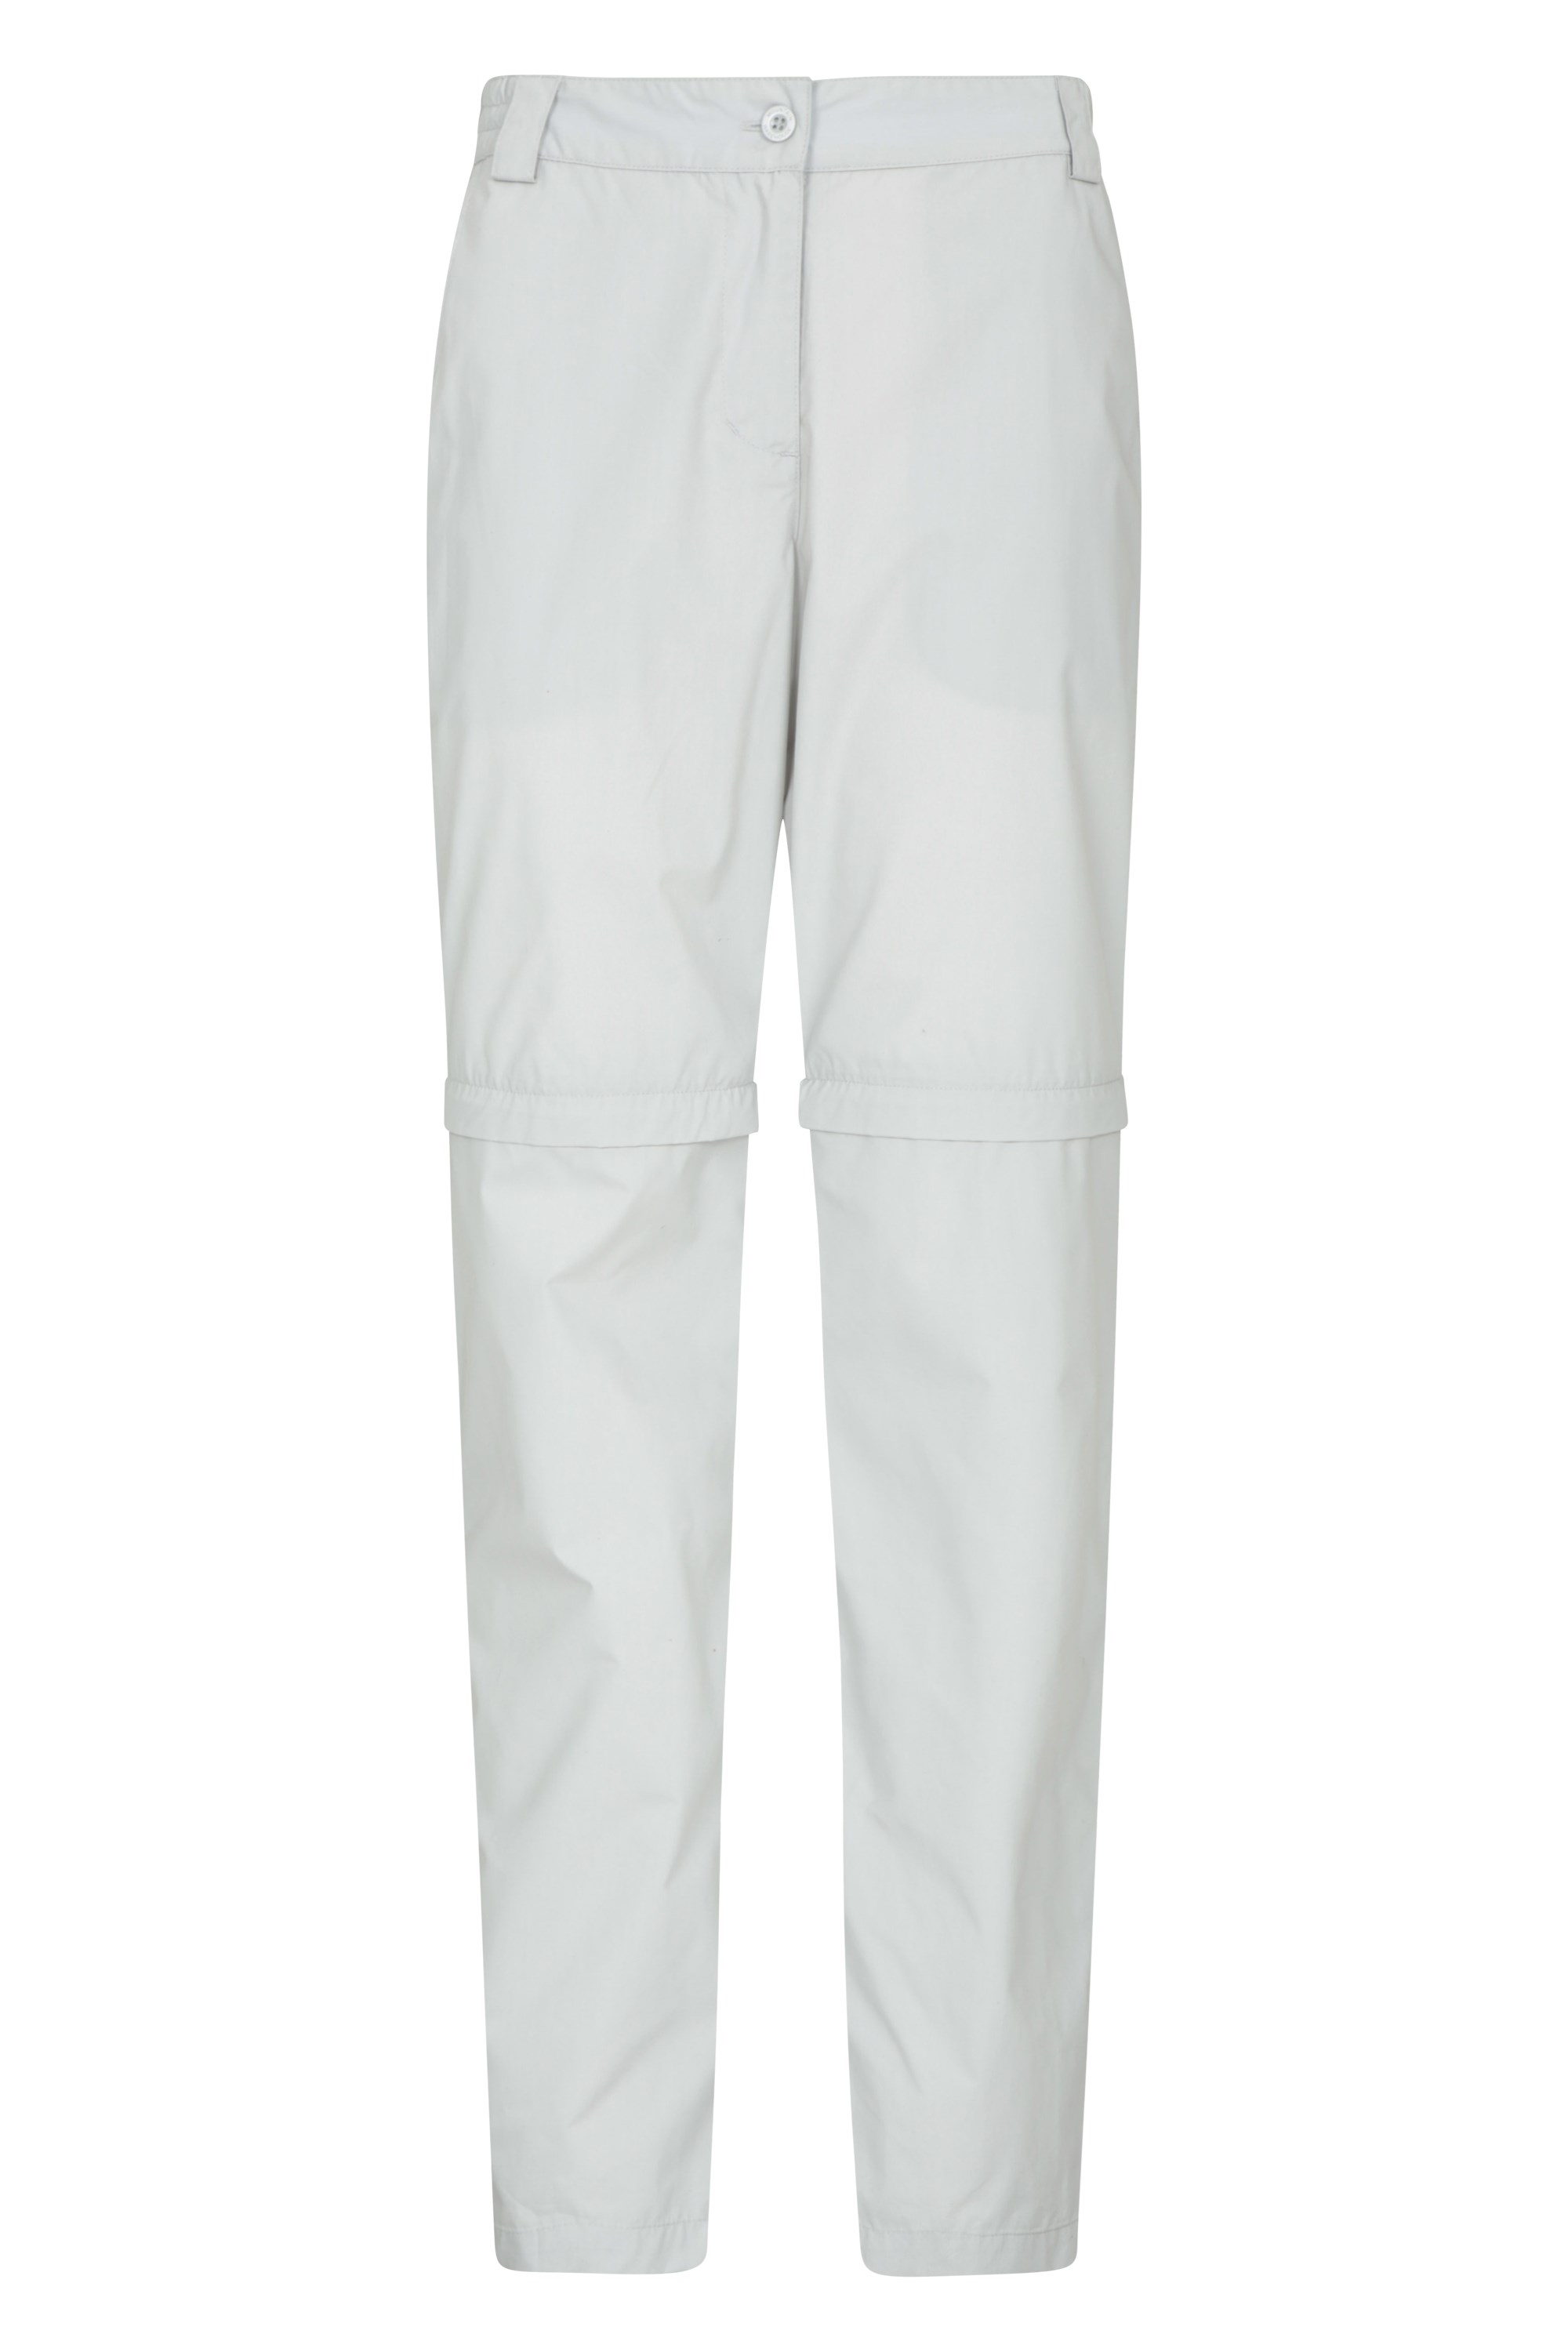 Quest Womens Zip-off Trousers - Grey